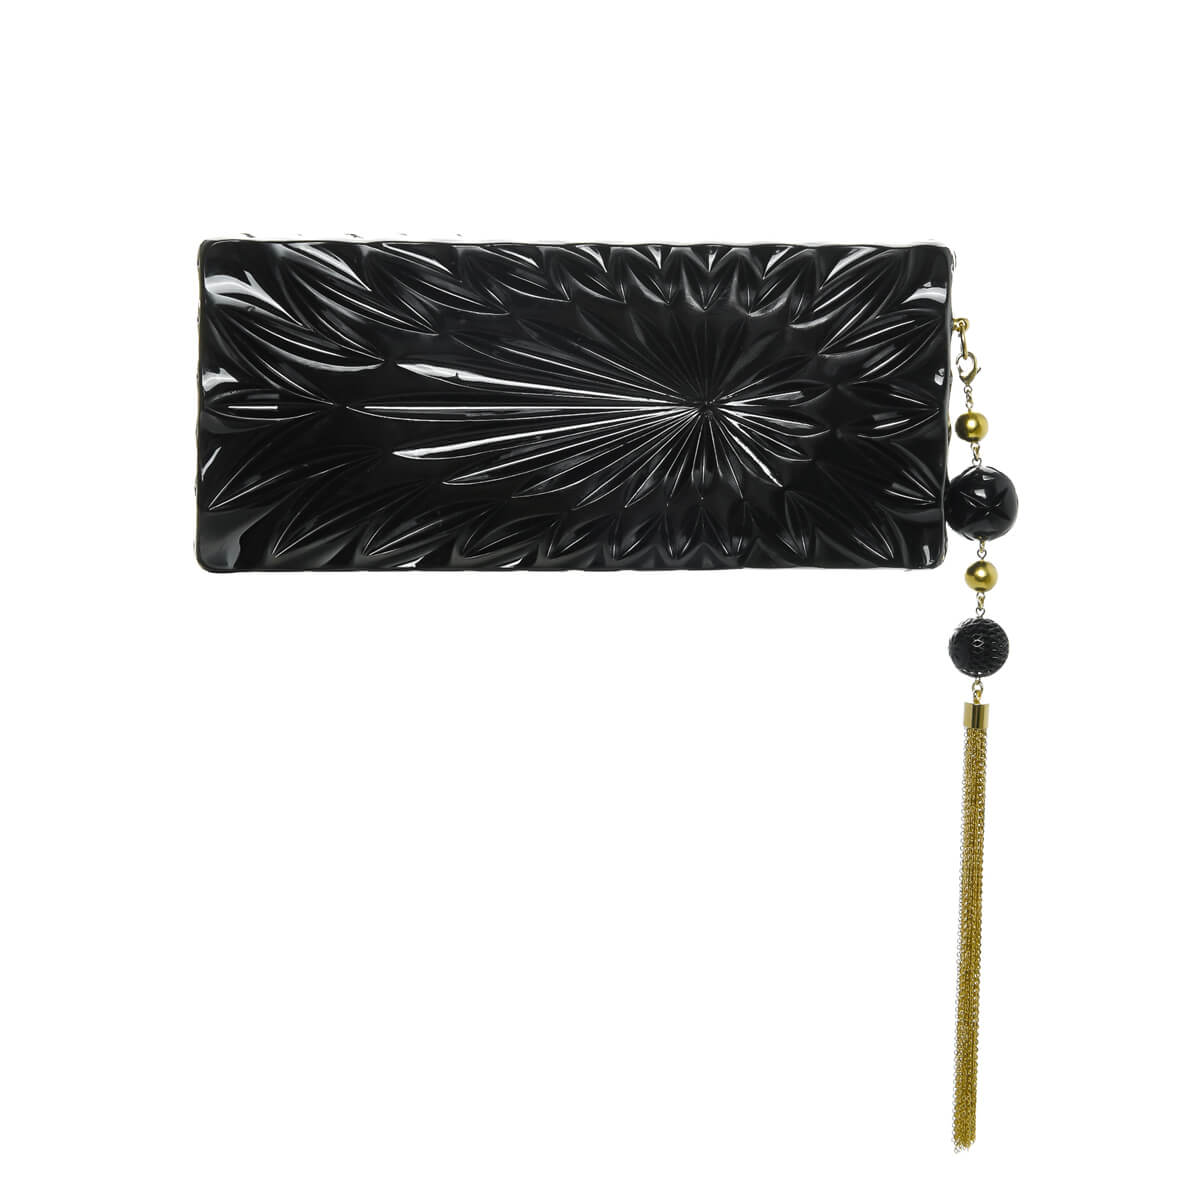 Hand Carved Long Rectangle Clutch Black